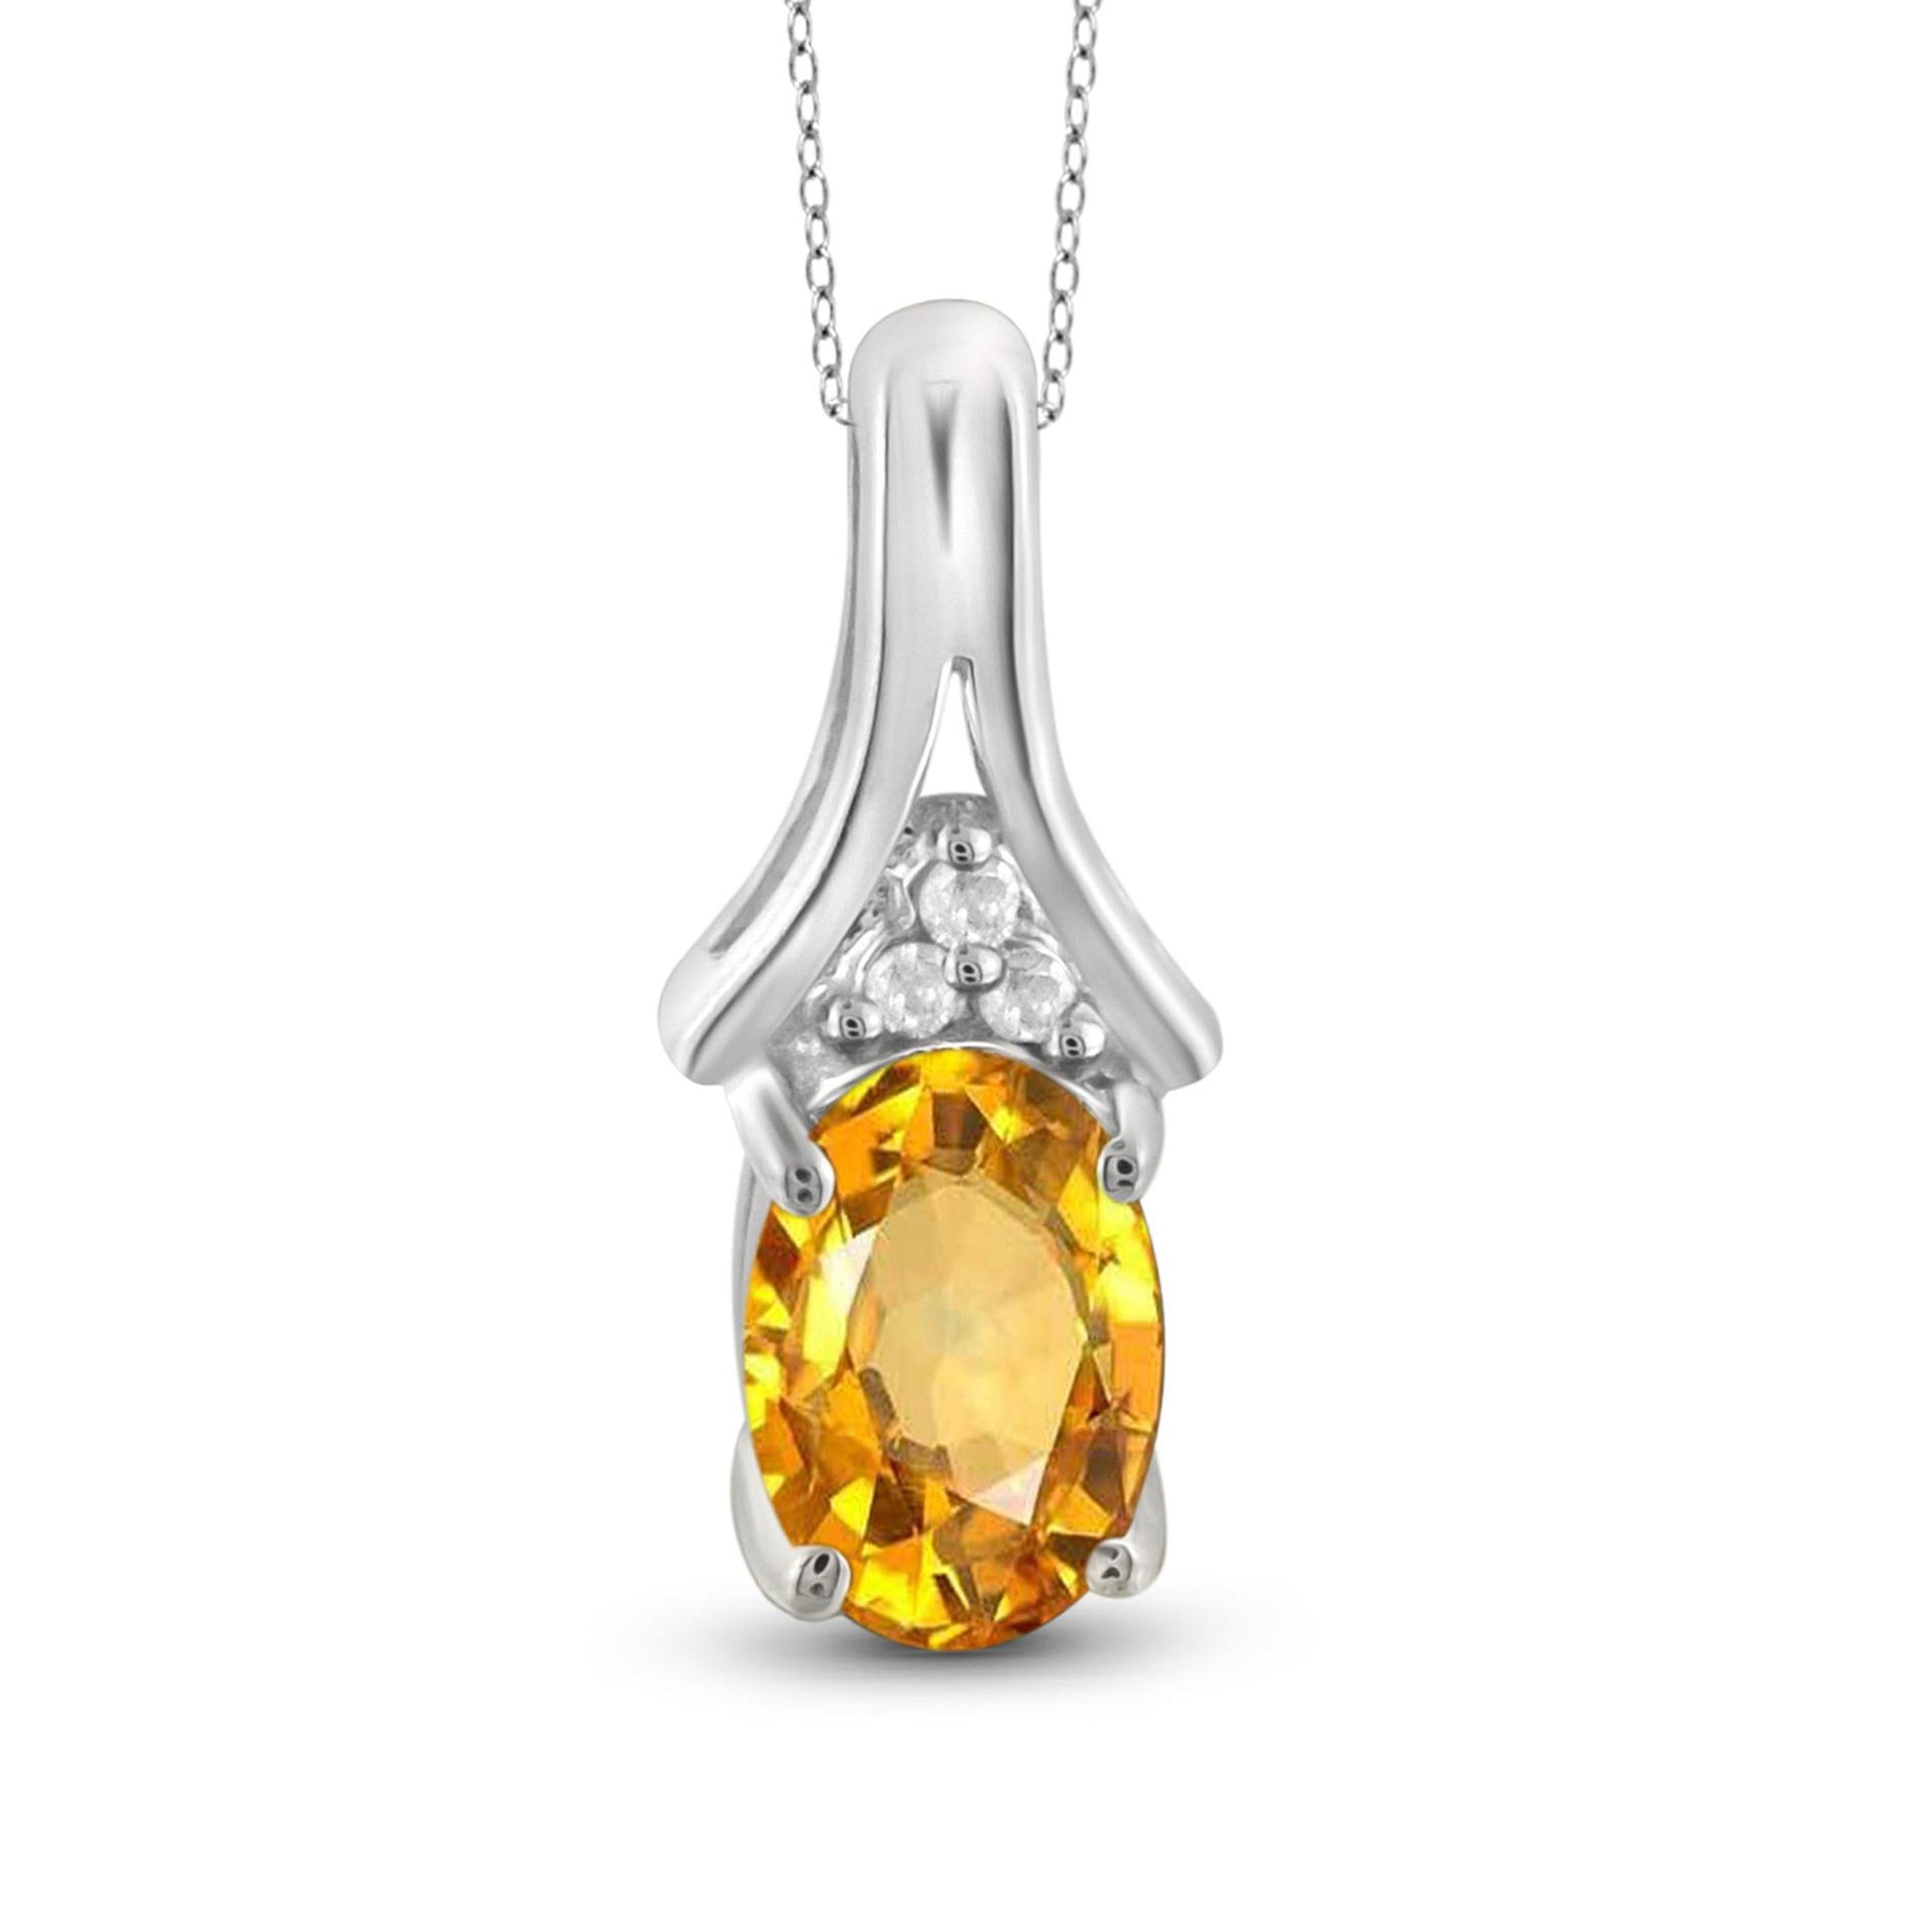 JewelonFire 1/2 Carat T.G.W. Citrine and White Diamond Accent Sterling Silver Pendant - Assorted Colors